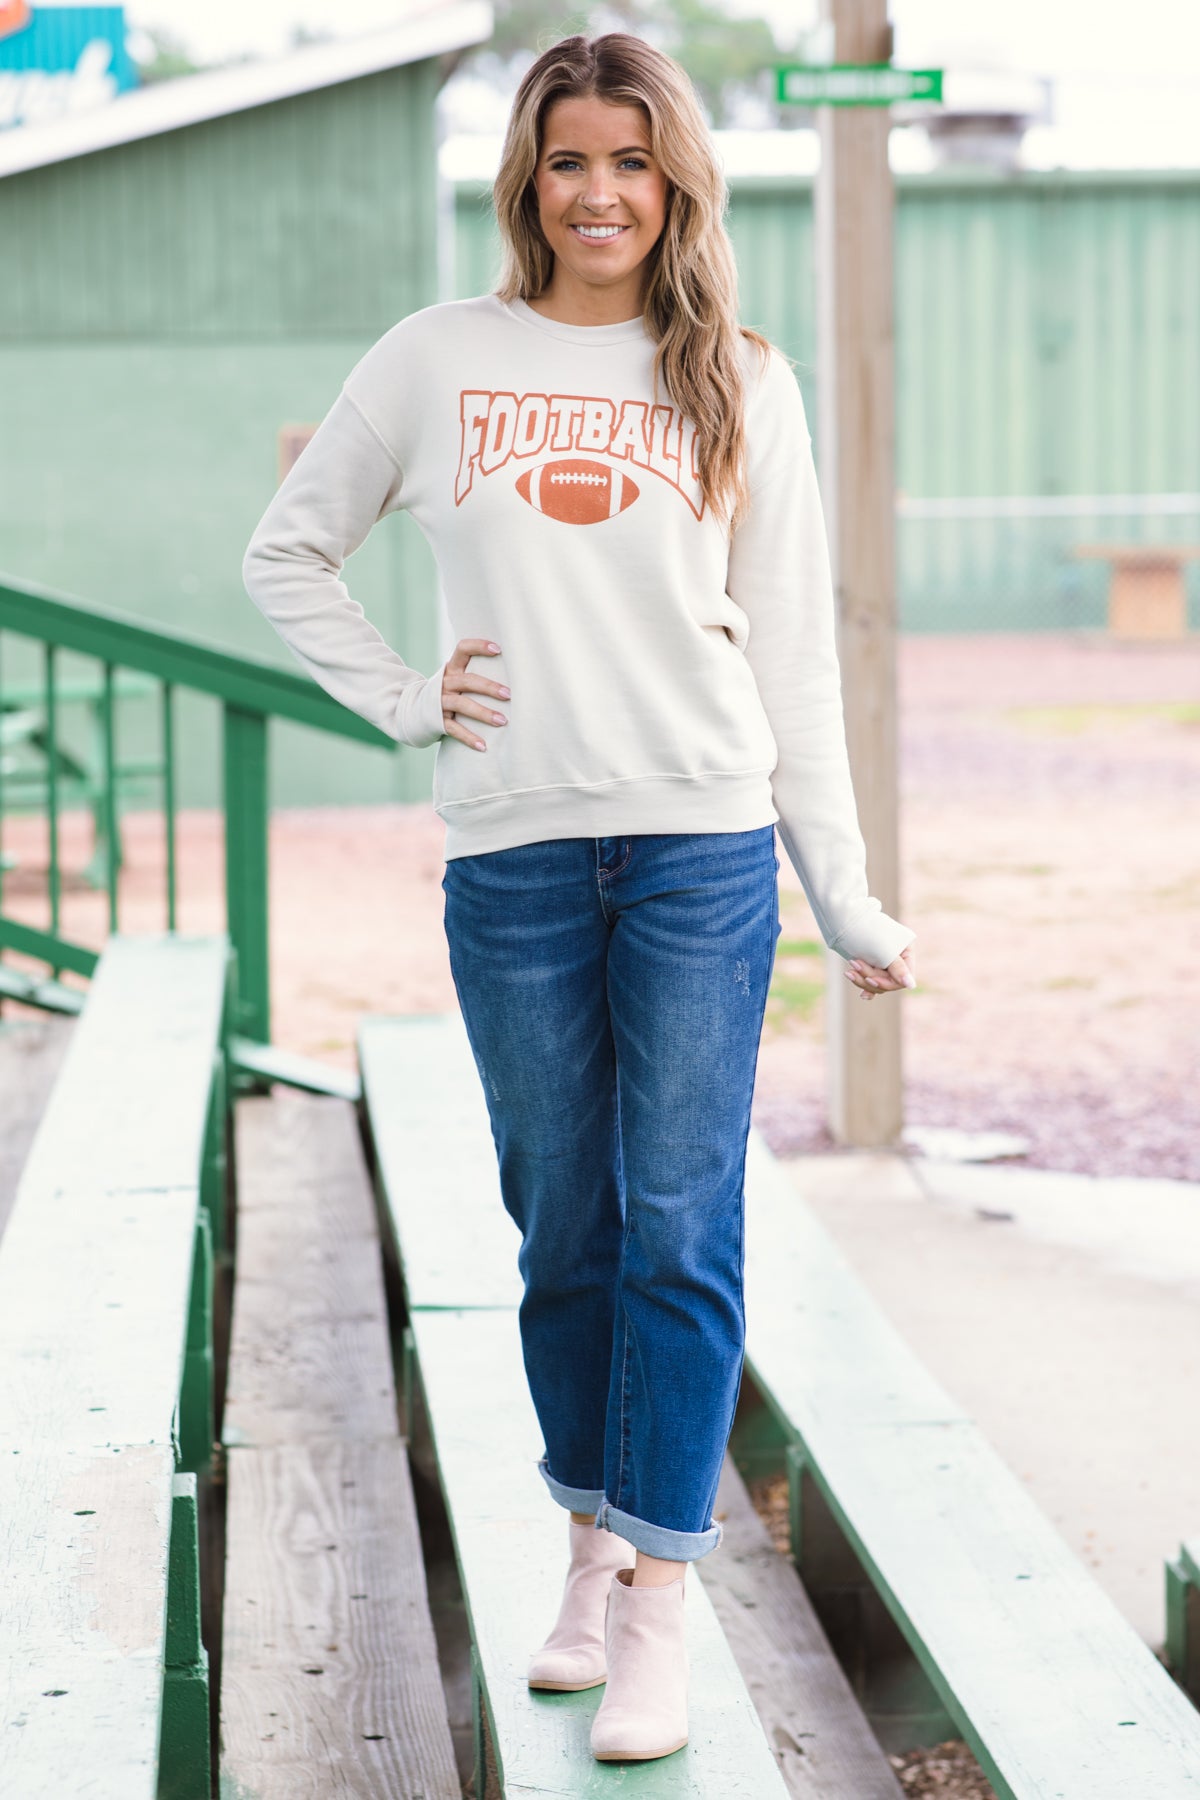 Oatmeal Football Graphic Sweatshirt - Filly Flair